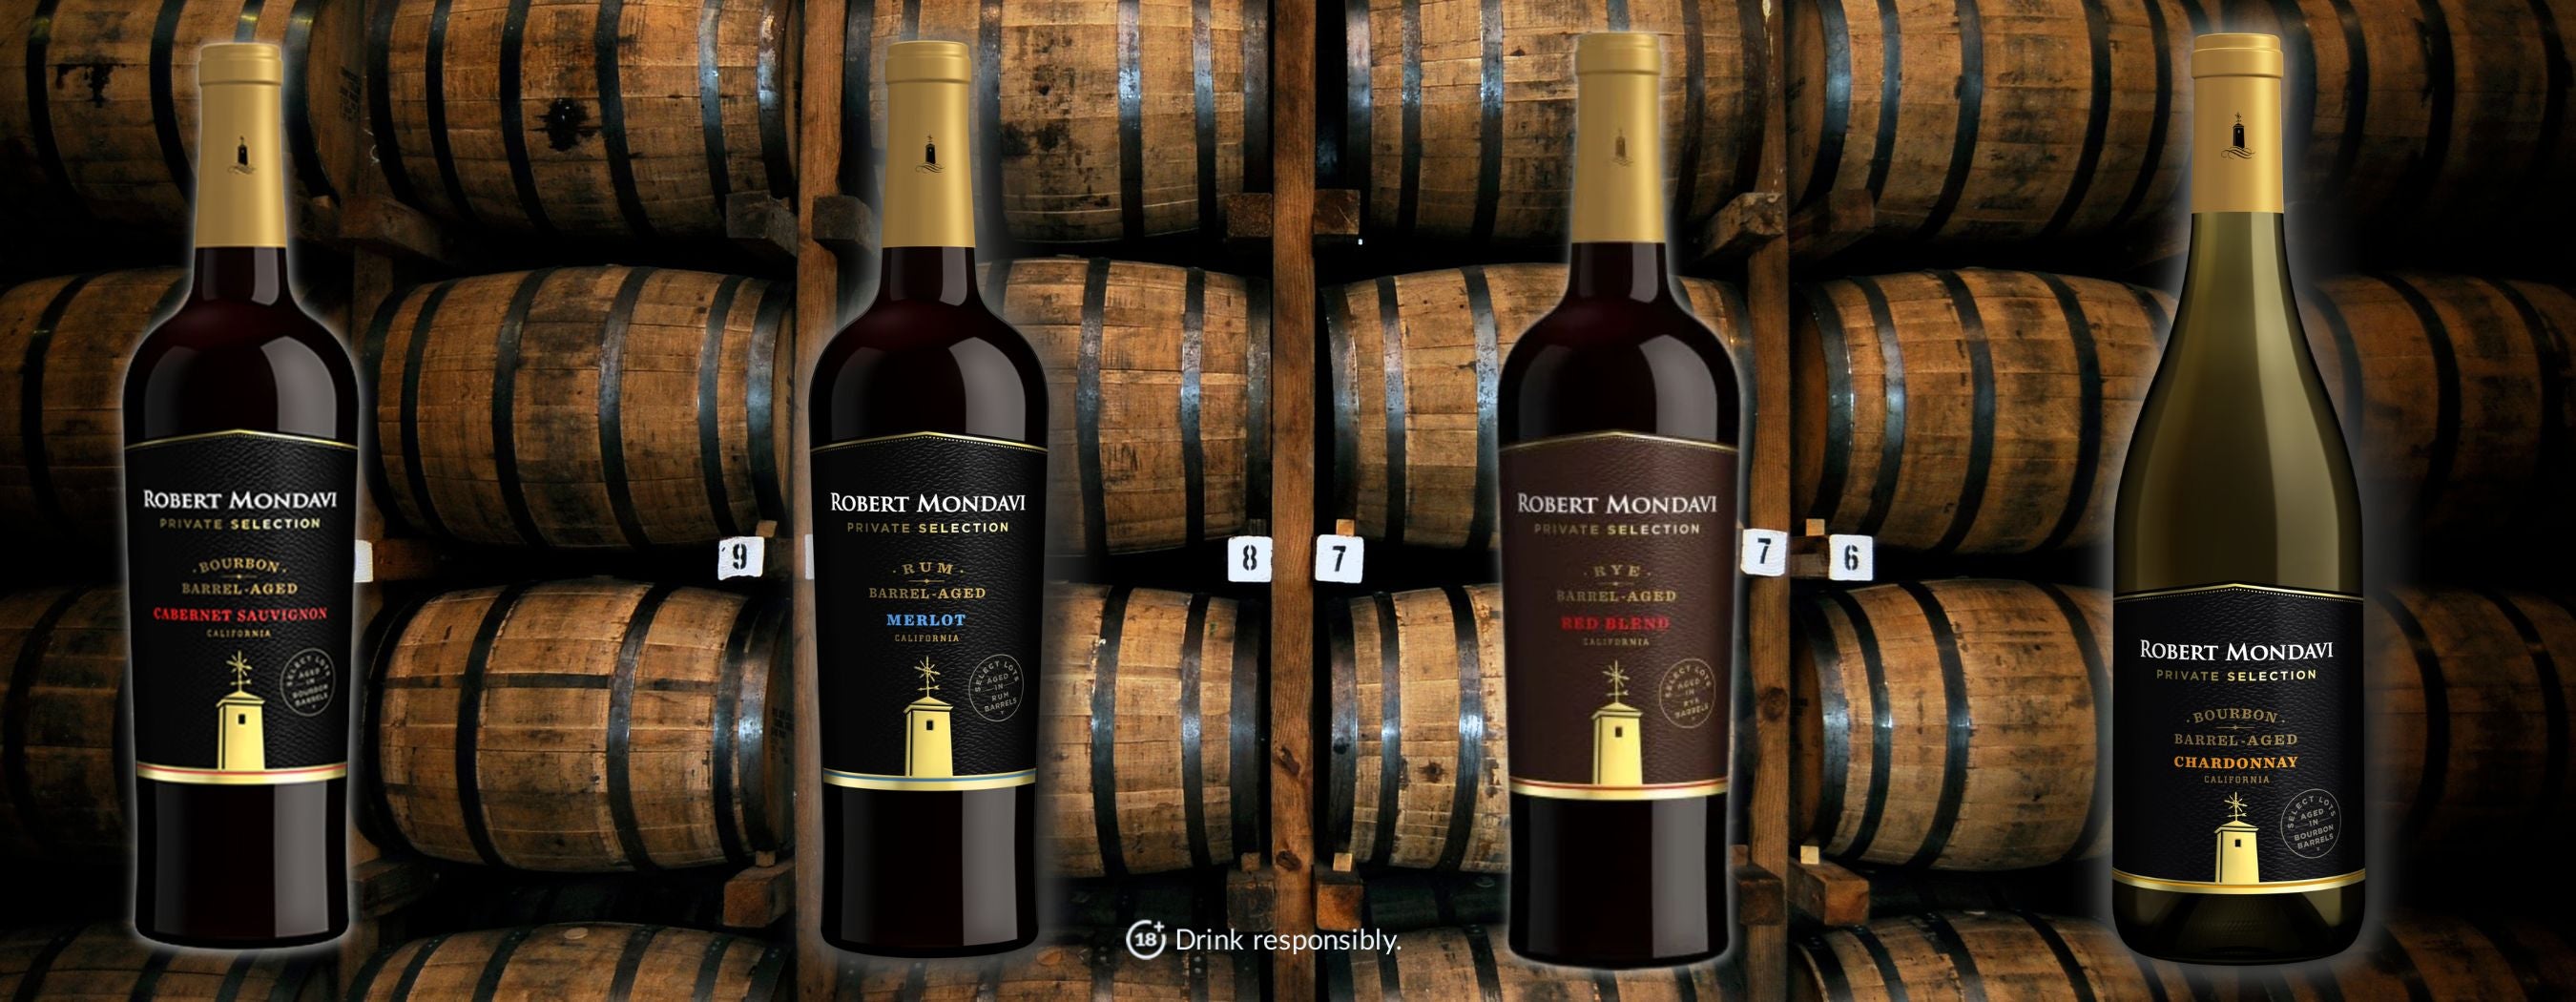 robert mondavi private selection barrel aged wines available online in the philippines